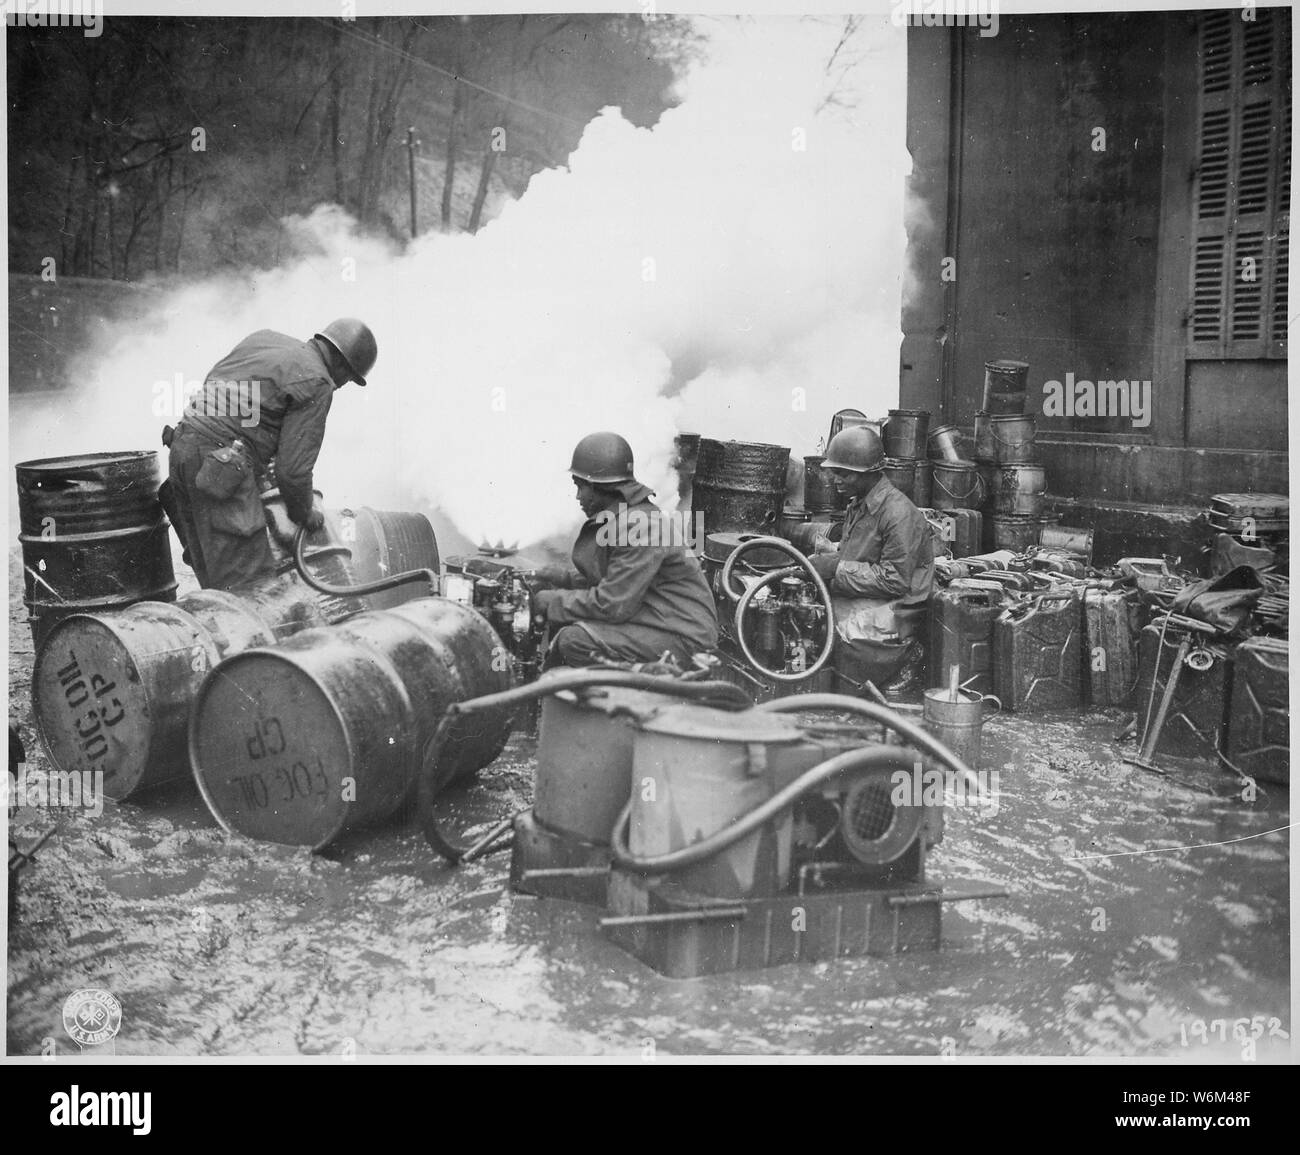 Soldiers of the 161st Chemical Smoke Generating Company, U.S. Third Army, move a barrel of oil in preparation to refilling an M-2 smoke generator, which spews forth a heavy cloud of white smoke. These men are engaged in laying a smoke screen to cover bridge building activities across the Saar River near Wallerfangen, Germany., 12/11/1944 Stock Photo